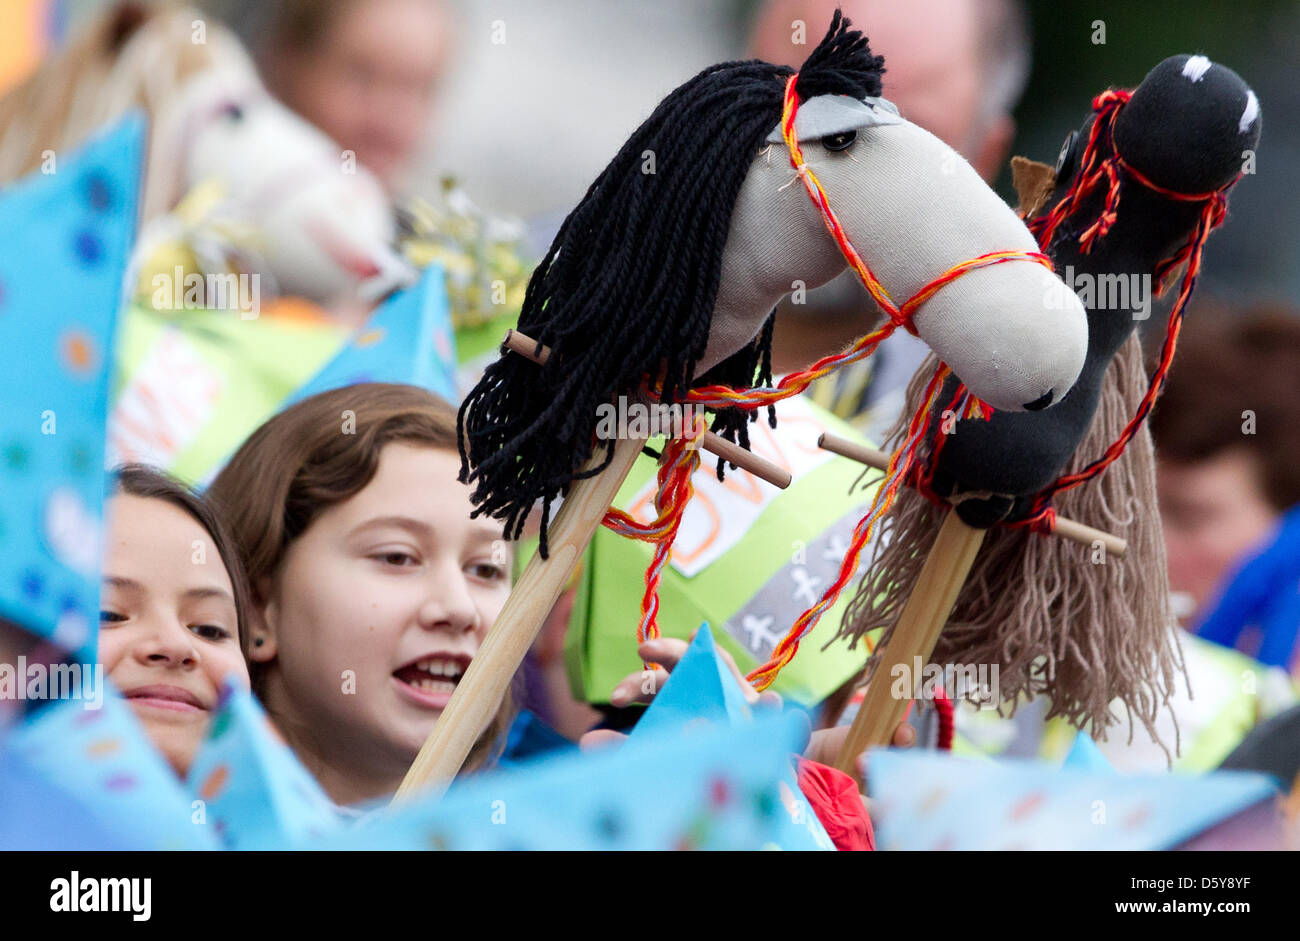 Elementary school pupils ride their self-made hobby horses in Osnabrueck, Germany, 18 October 2012. The hobby horse race has taken place since 1953. The custom takes place to commemorate the Peace of Westphalia in 1648. Photo: FRISO GENTSCH Stock Photo